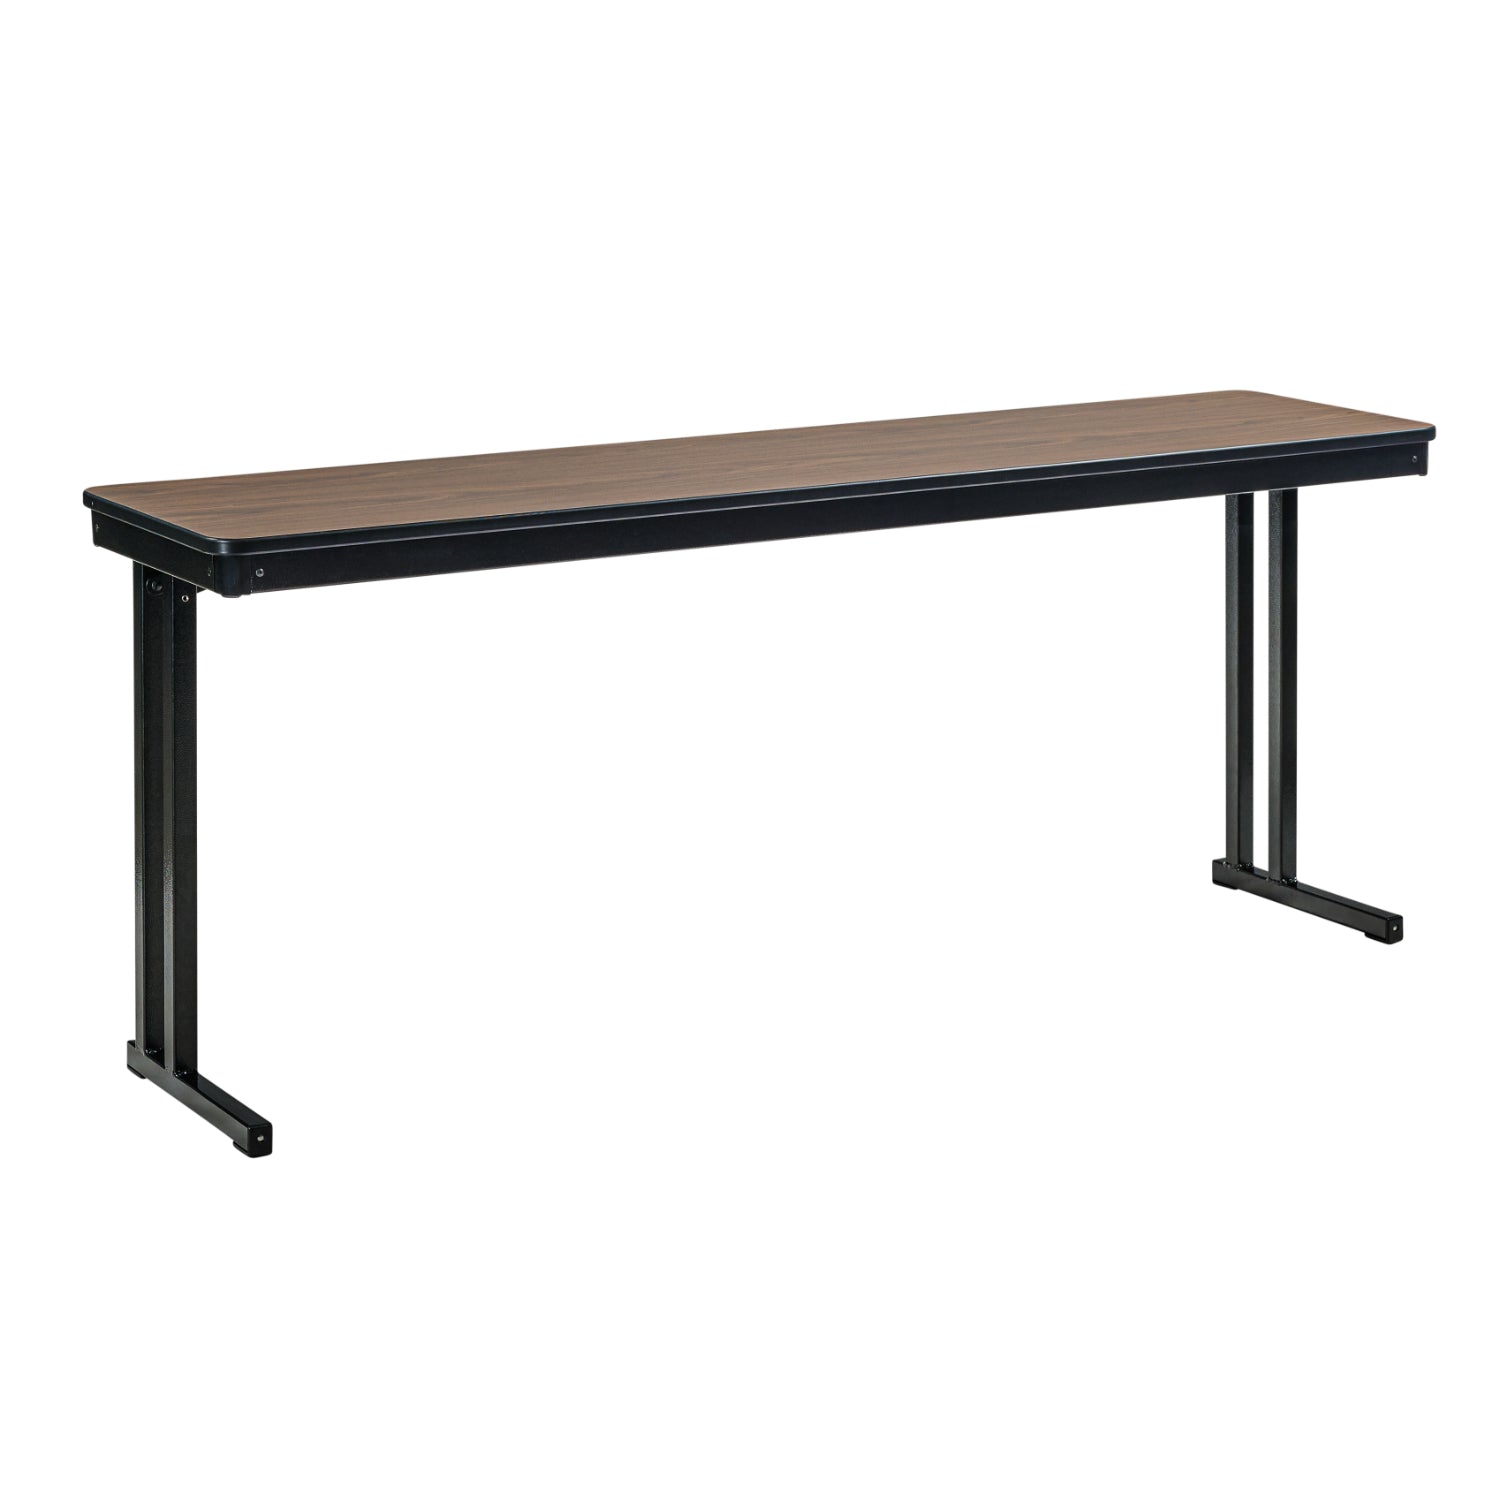 Max Seating Folding Training and Seminar Table with Cantilever Legs, 24" x 72", High Pressure Laminate Top with Plywood Core/PVC Edge Banding